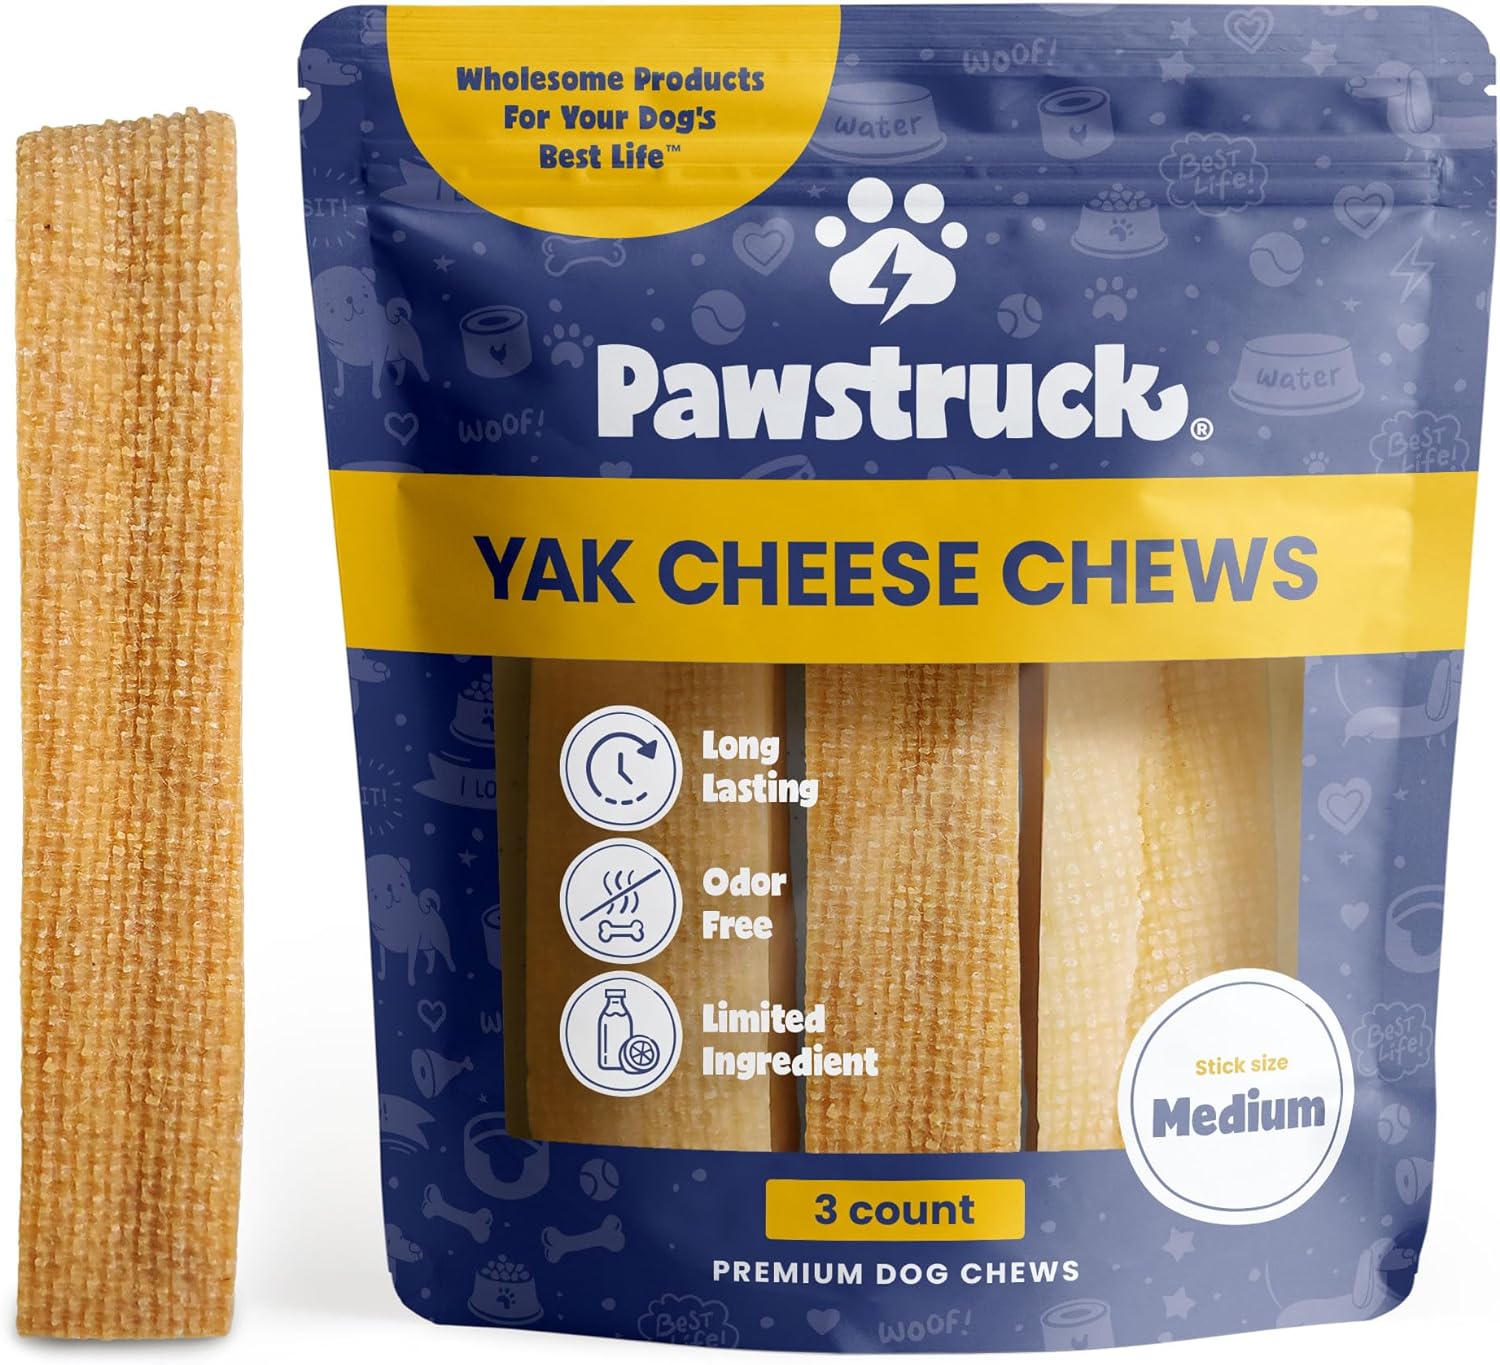 Pawstruck Himalayan Yak Dog Chew (3-4 oz. Pieces) Natural Yak & Cow Milk/Cheese from Himalayas Long-Lasting, Jumbo Treat for Dog, Best Thick Chew Stick - 3 Pack - Packaging May Vary